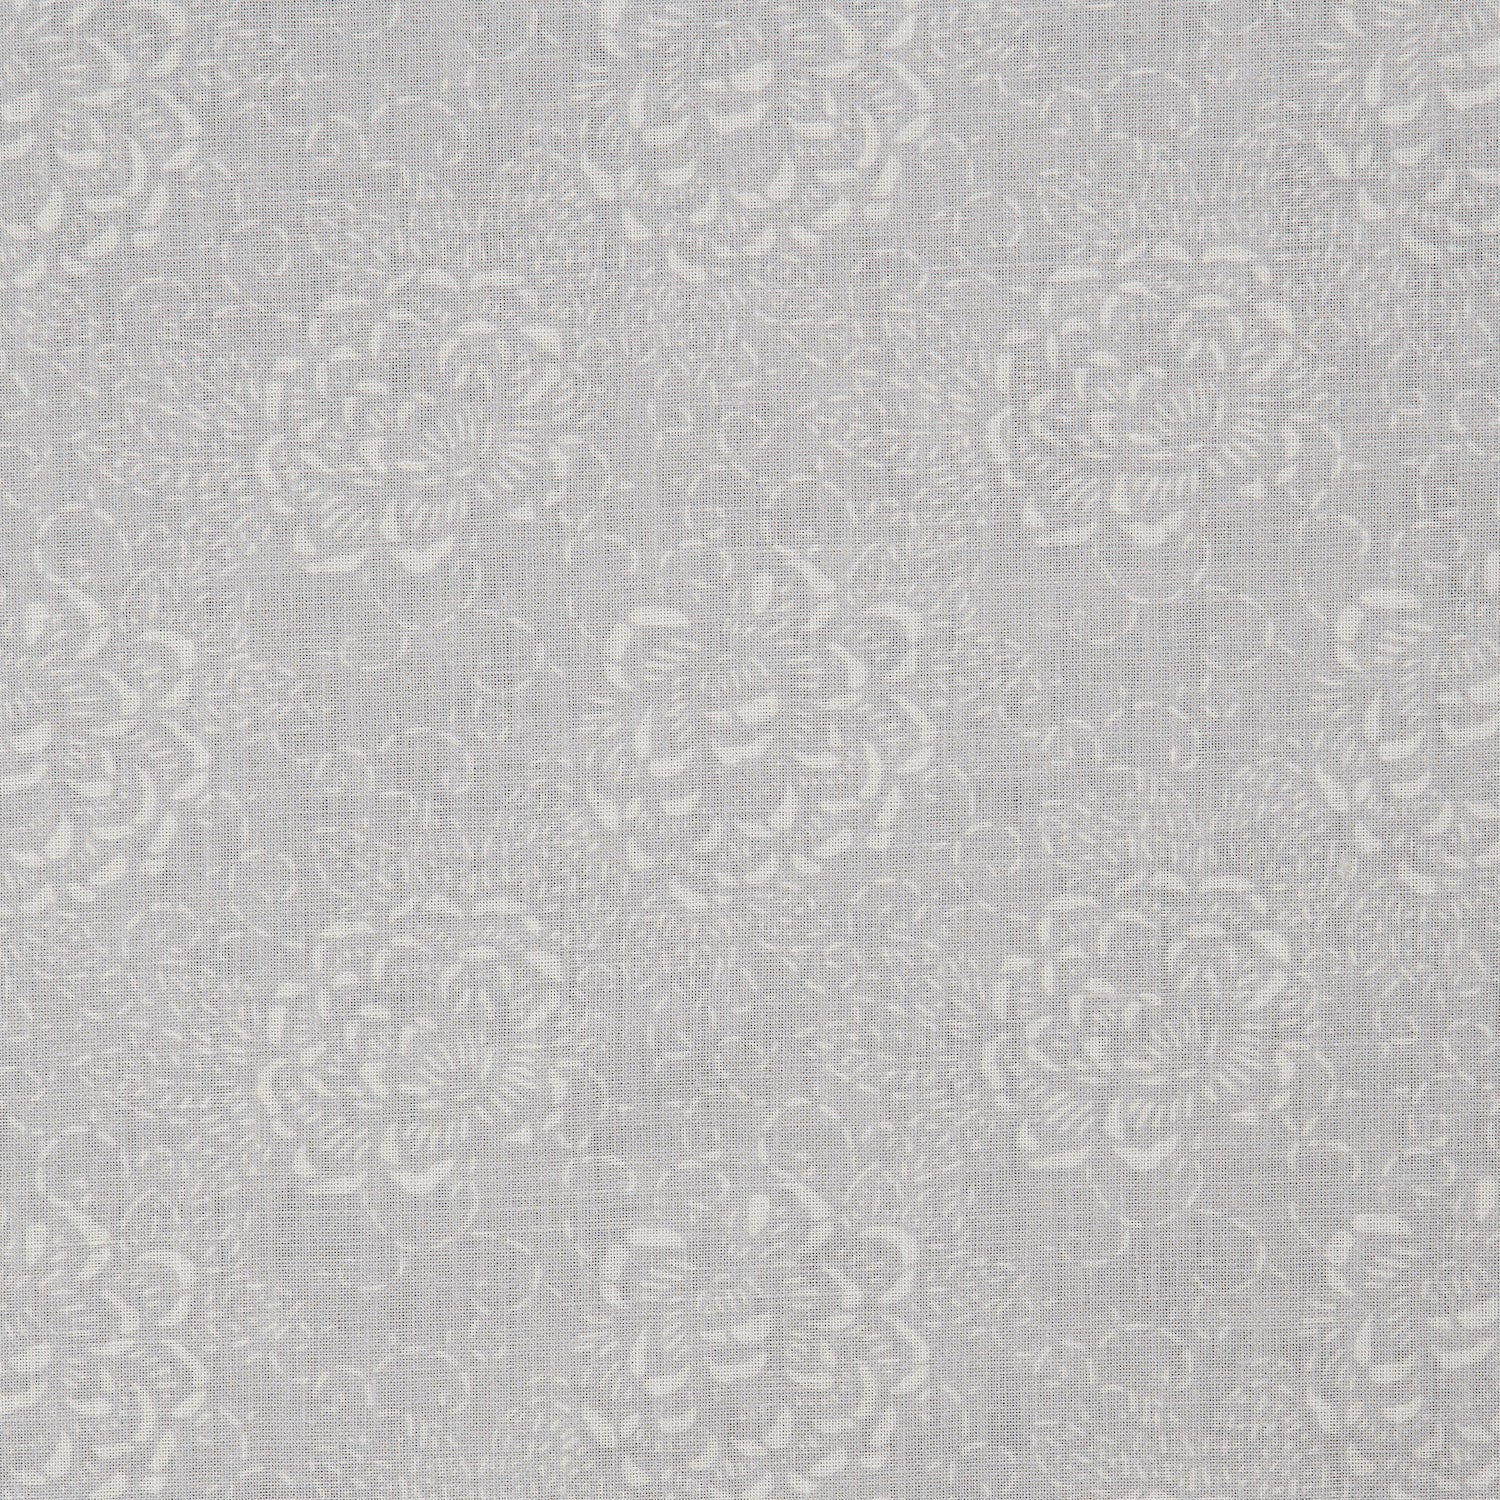 Detail of a printed linen fabric in a repeating camellia pattern in white on a gray field.